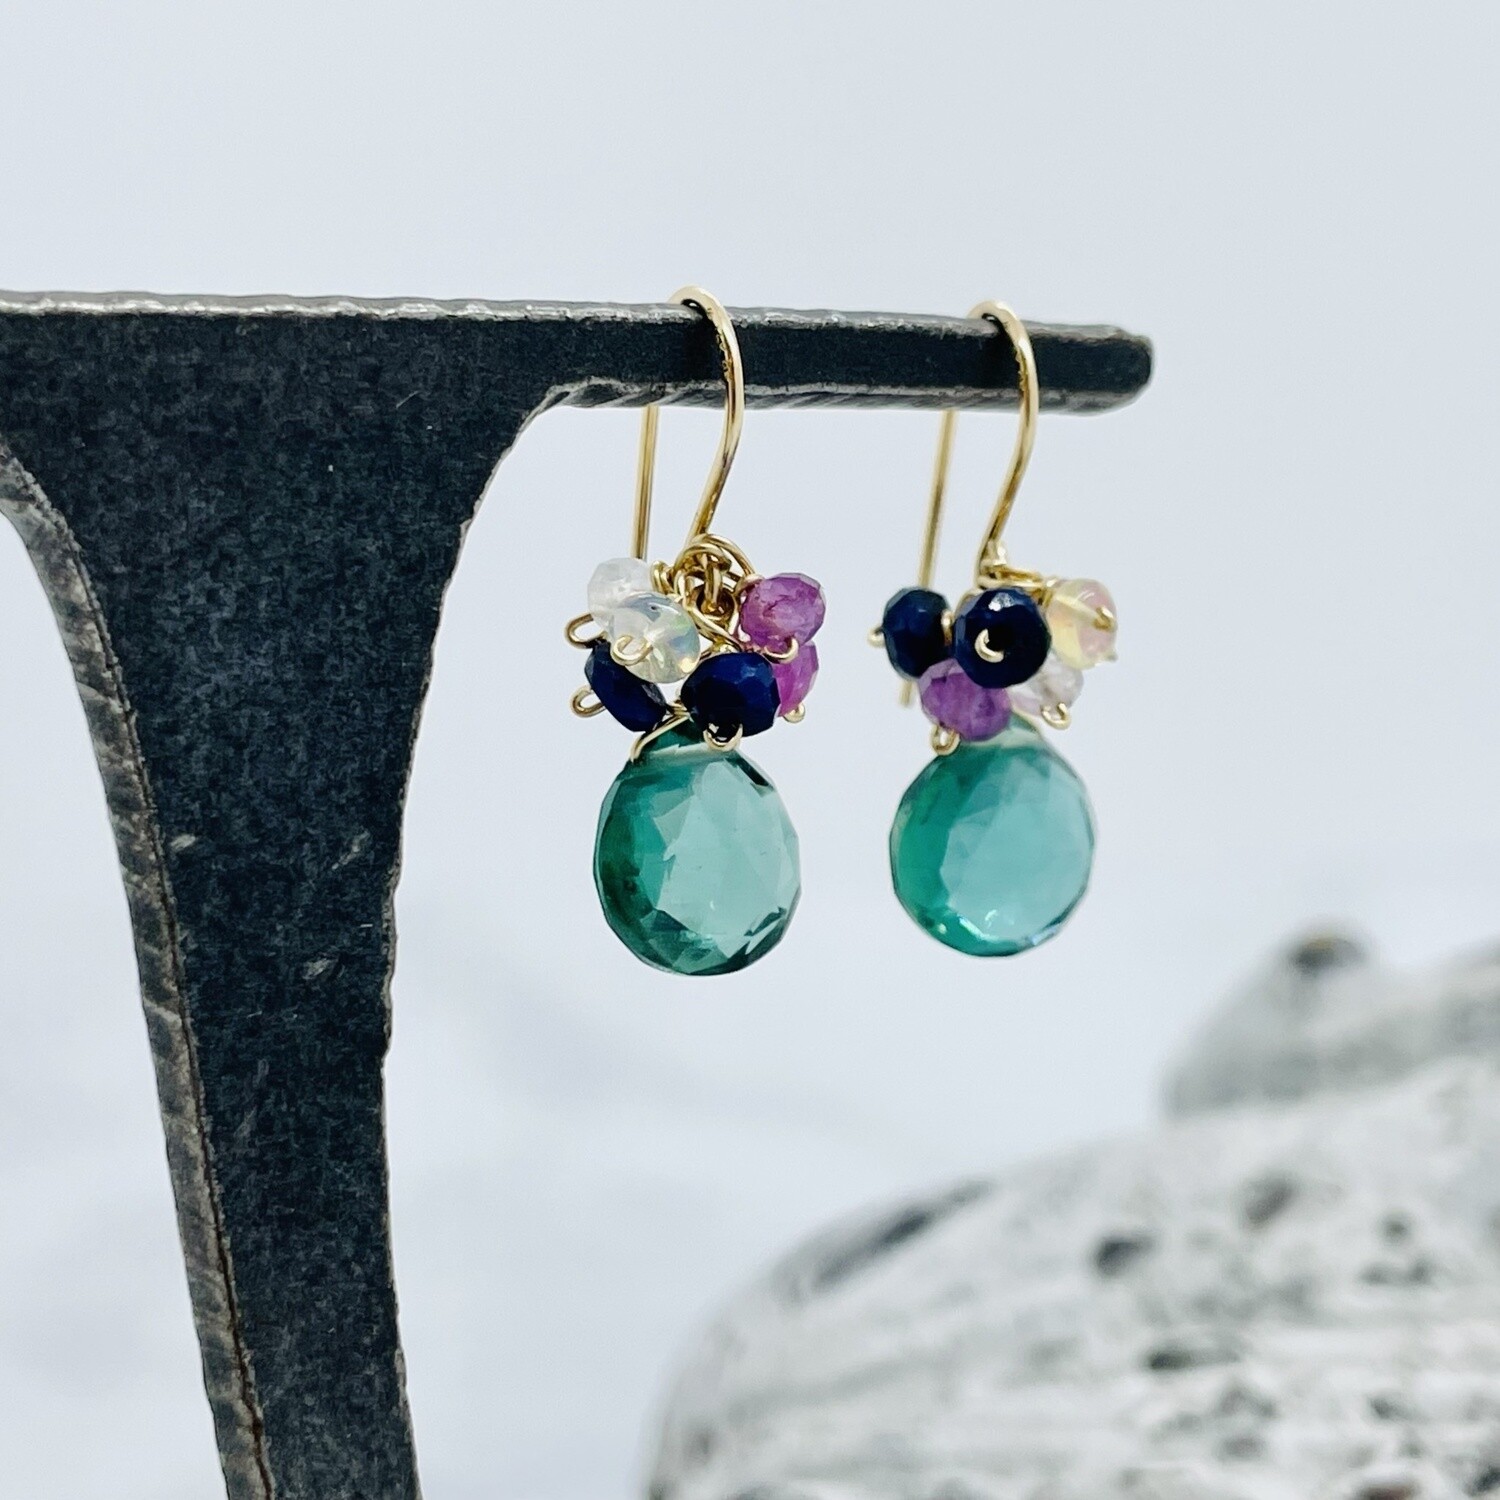 Handmade 14k Goldfill Earrings with Indicolite Quartz with Mixed Sapphire Rondelles